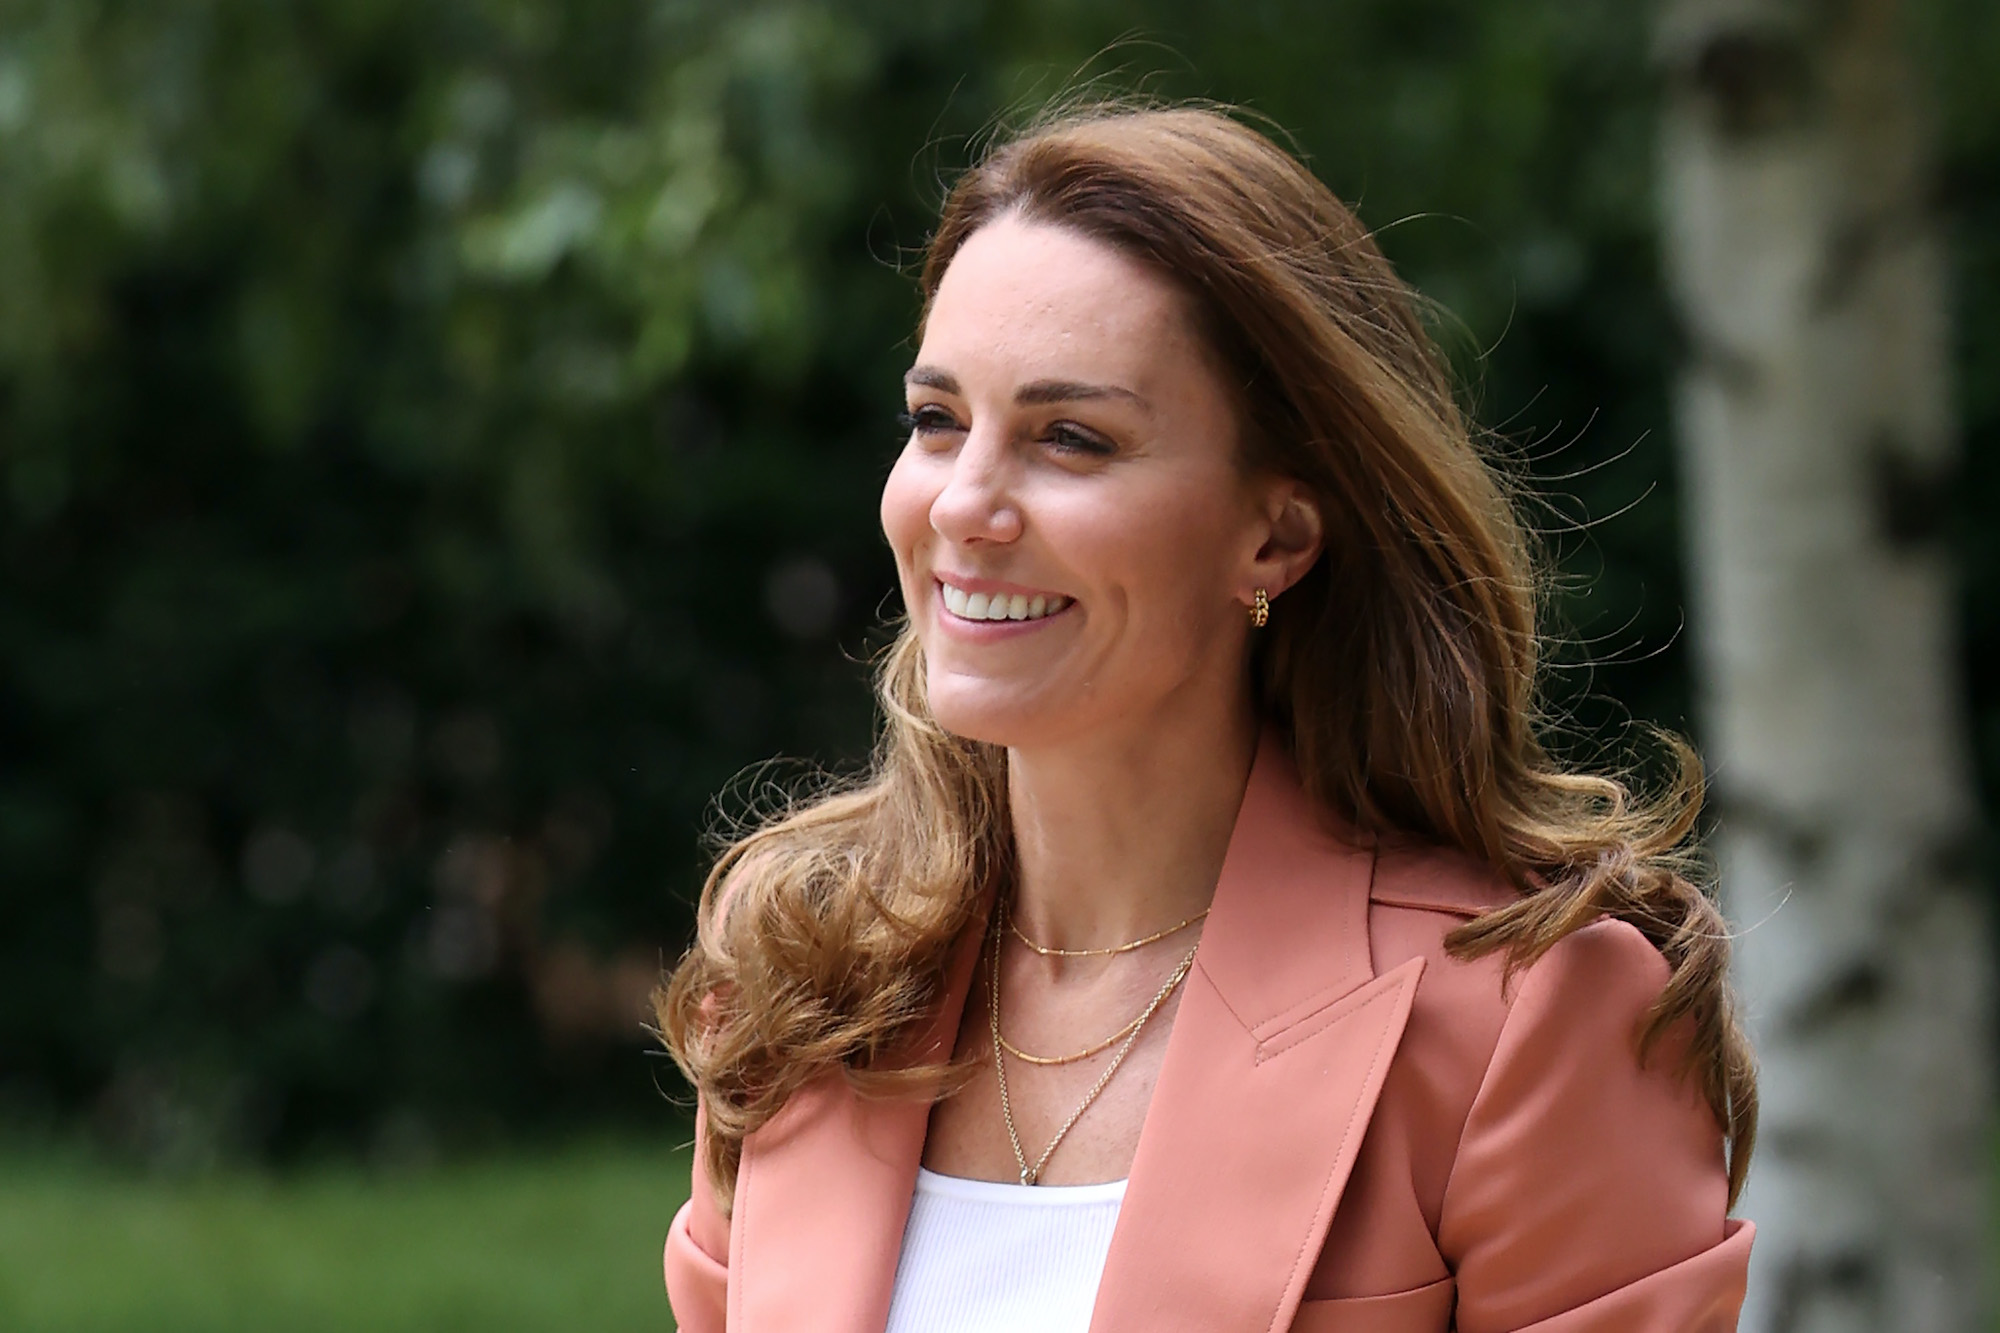 Duchess of Cambridge Kate Middleton smiling, looking off camera in a salmon-colored blazer